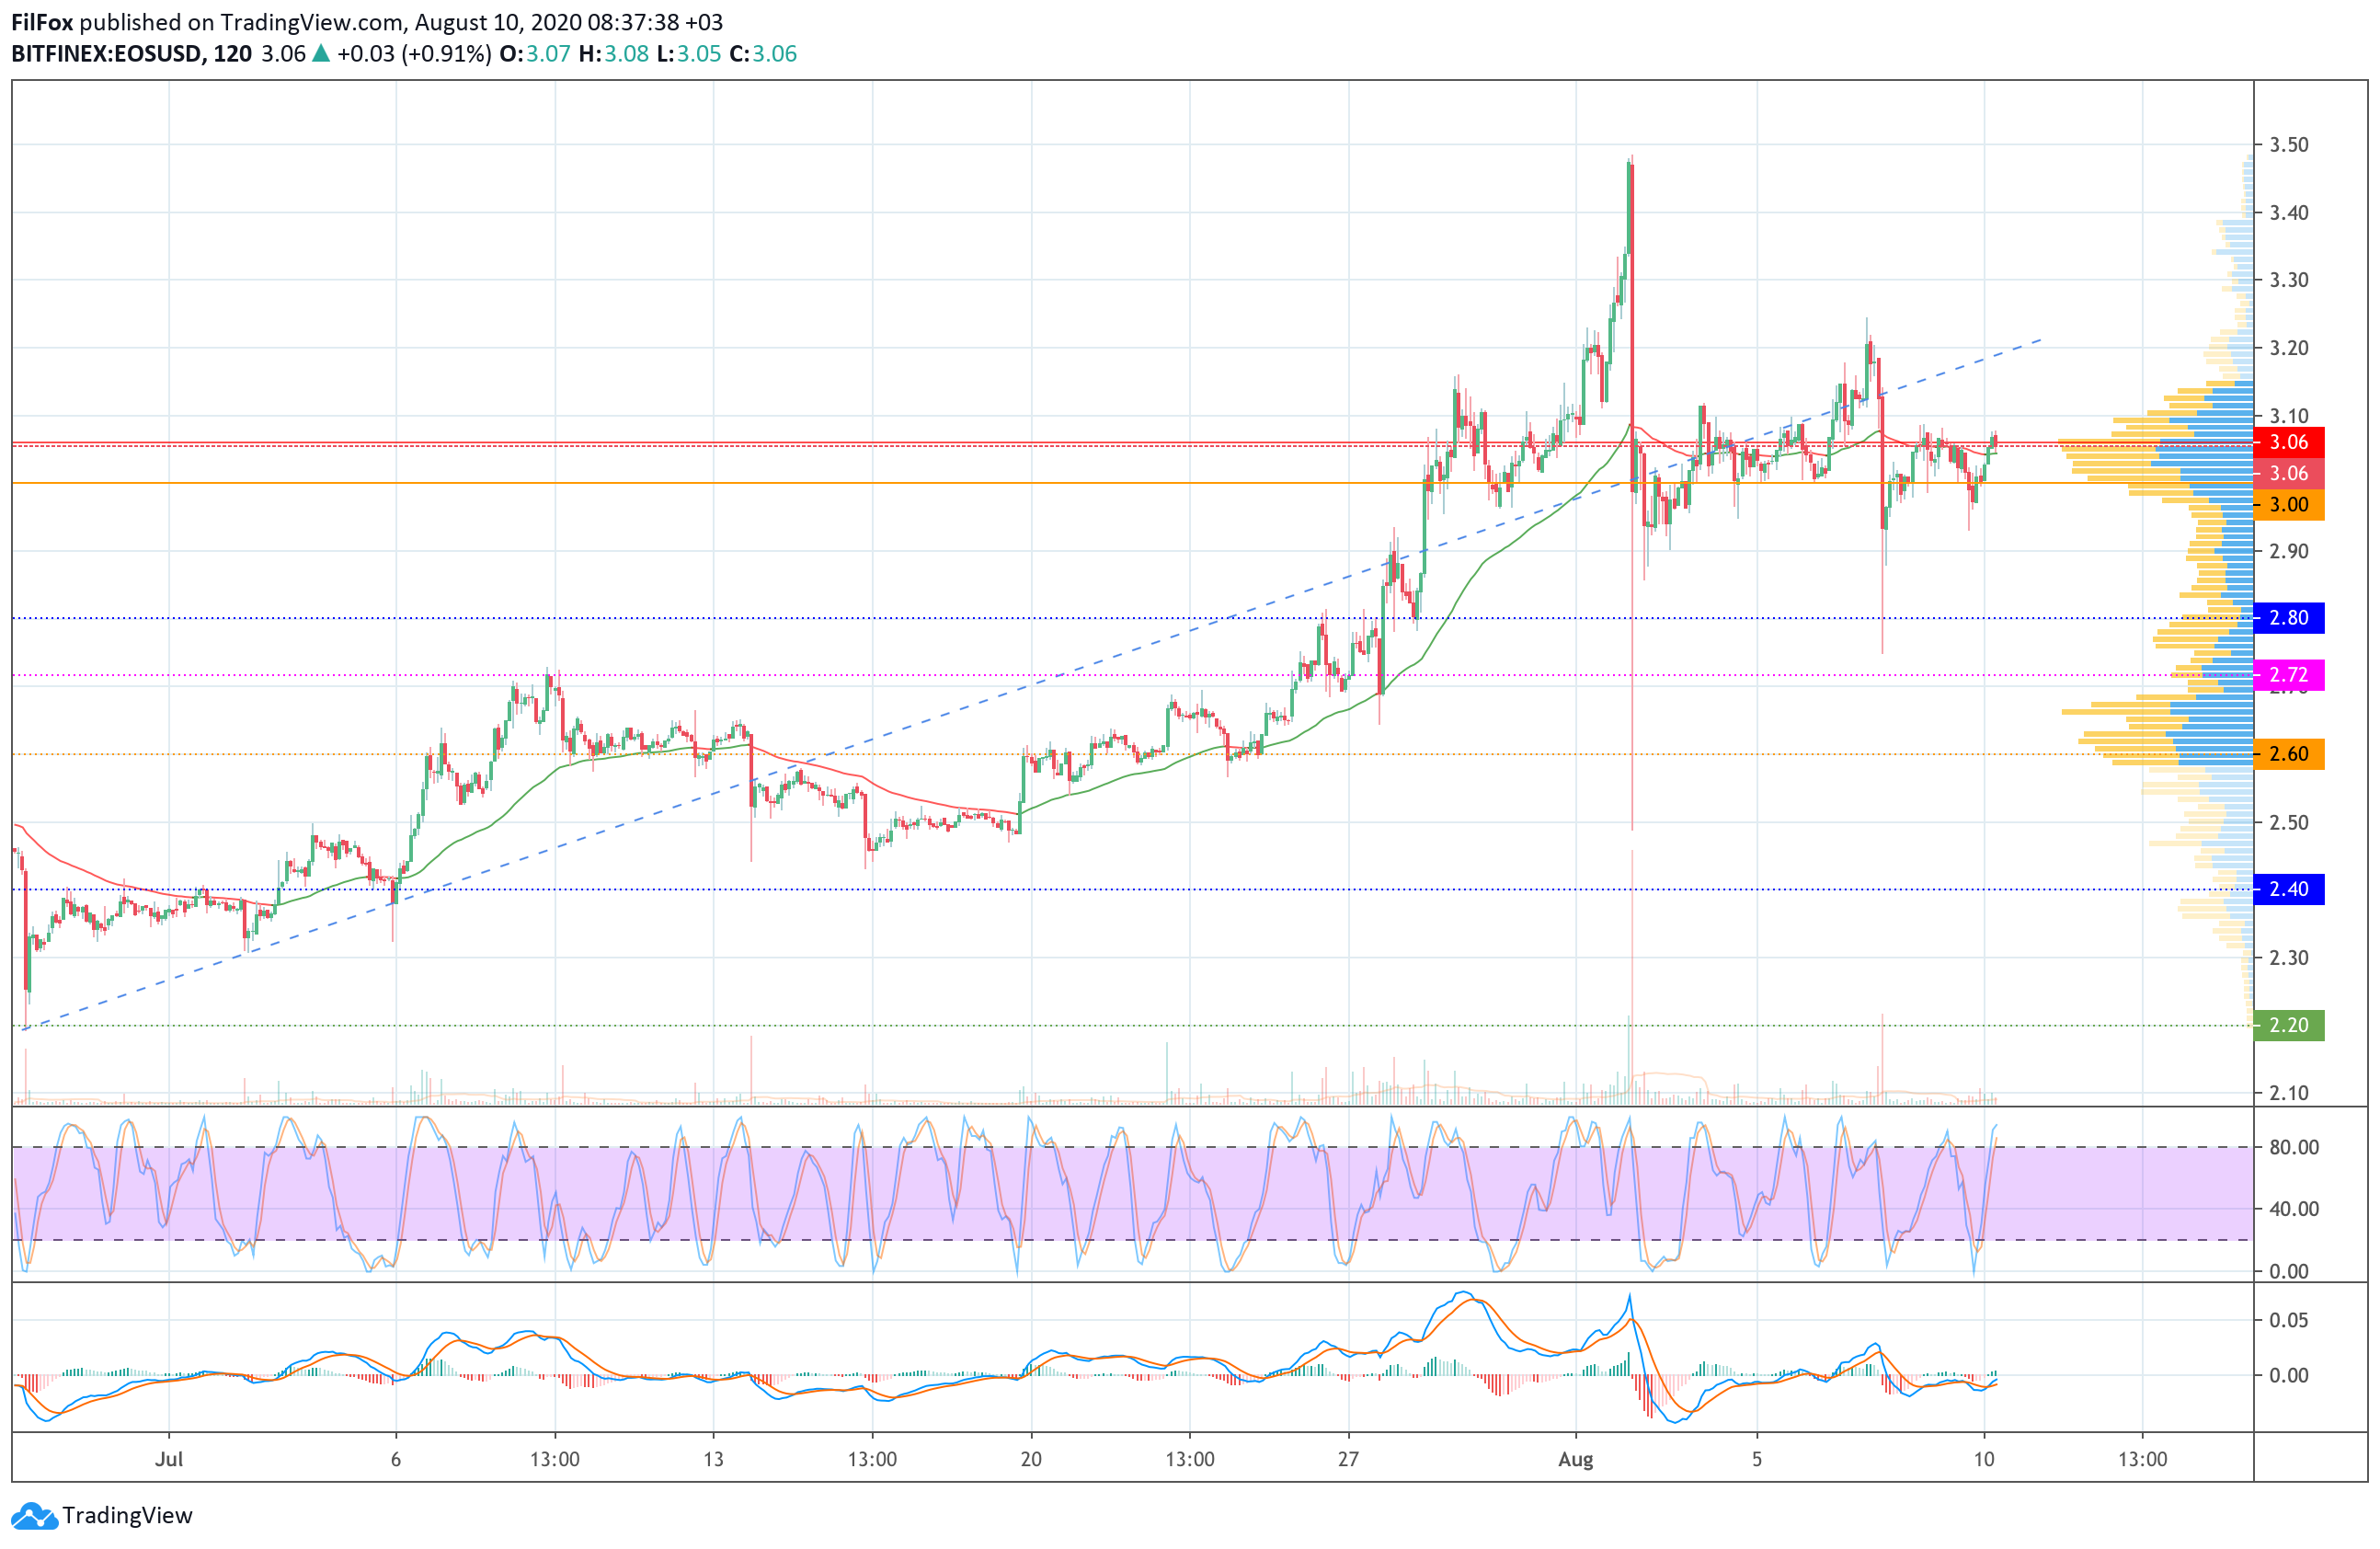 Analysis of the prices of Bitcoin Cash, Litecoin, Cardano, EOS and Stellar for 08/10/2020